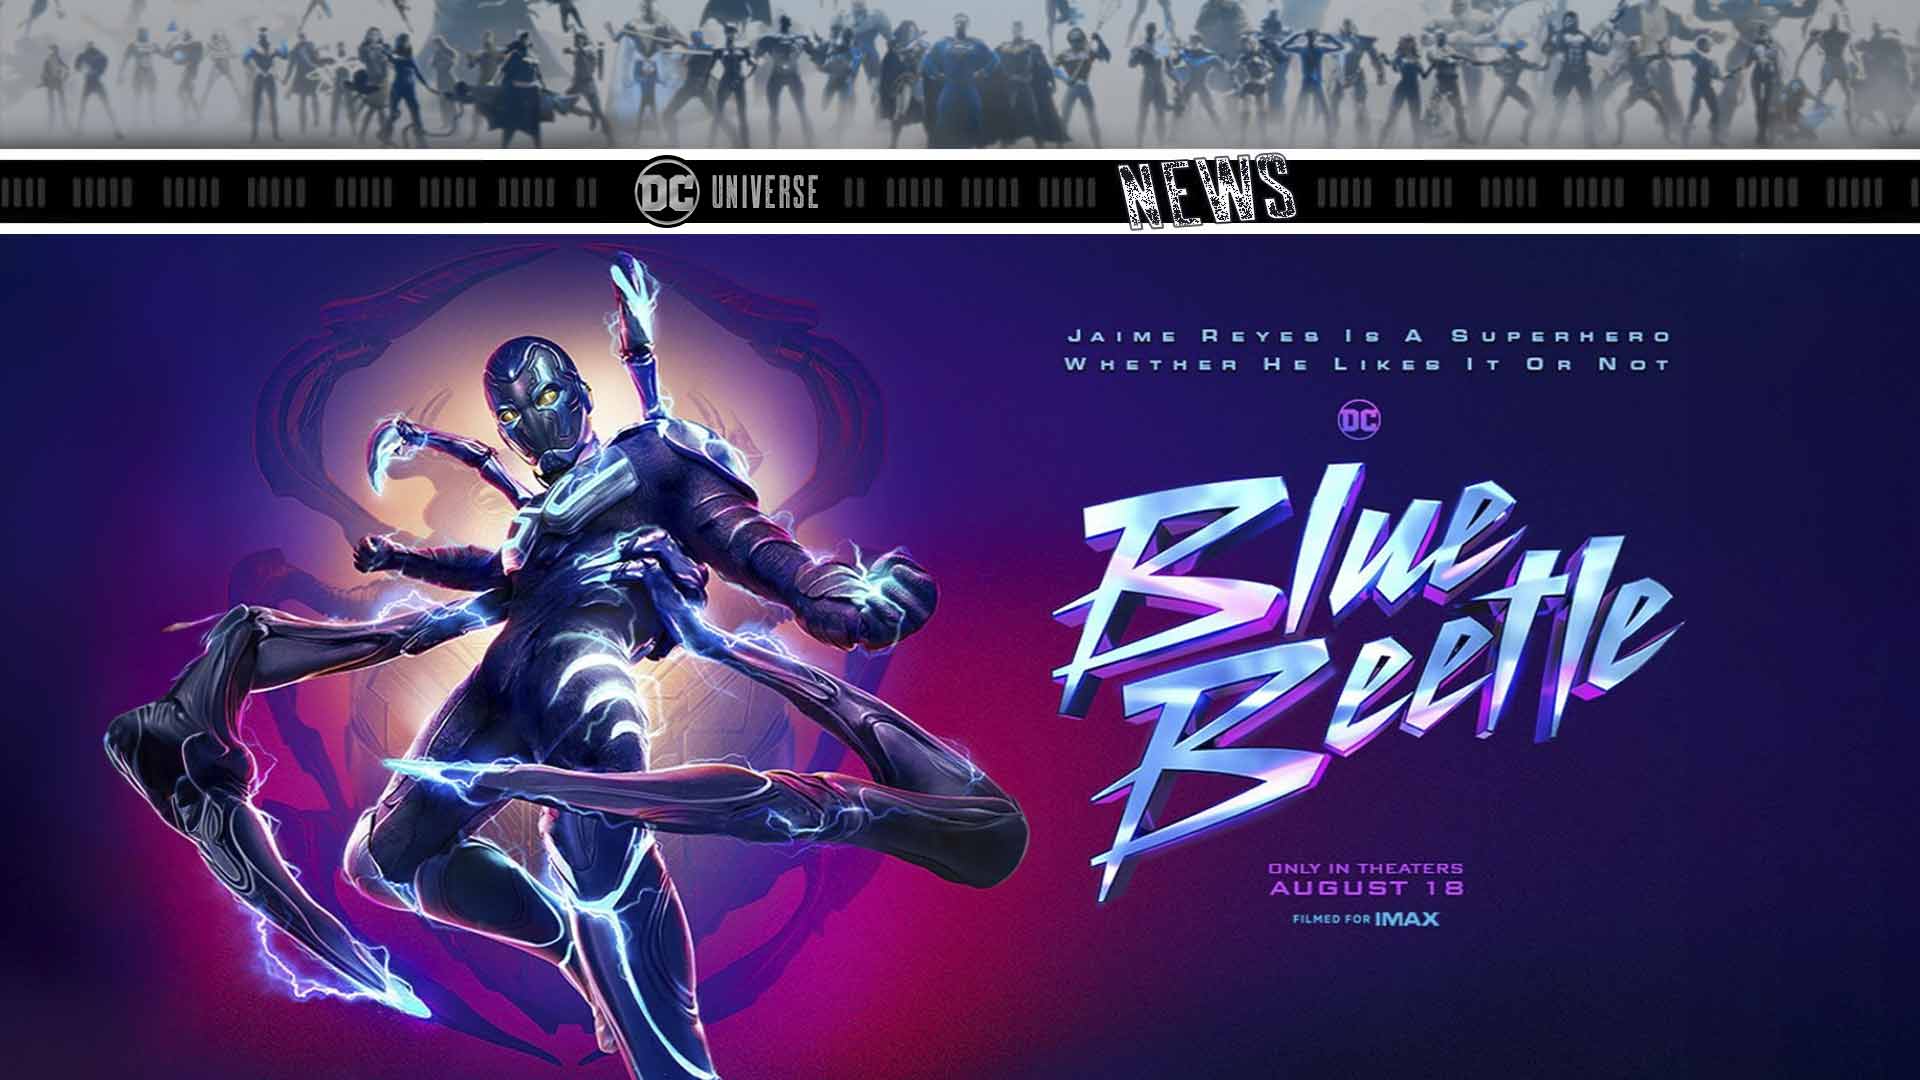 RELEASE DATE OF DCU'S BLUE BEETLE REVEALED WITH A STUNNING POSTER